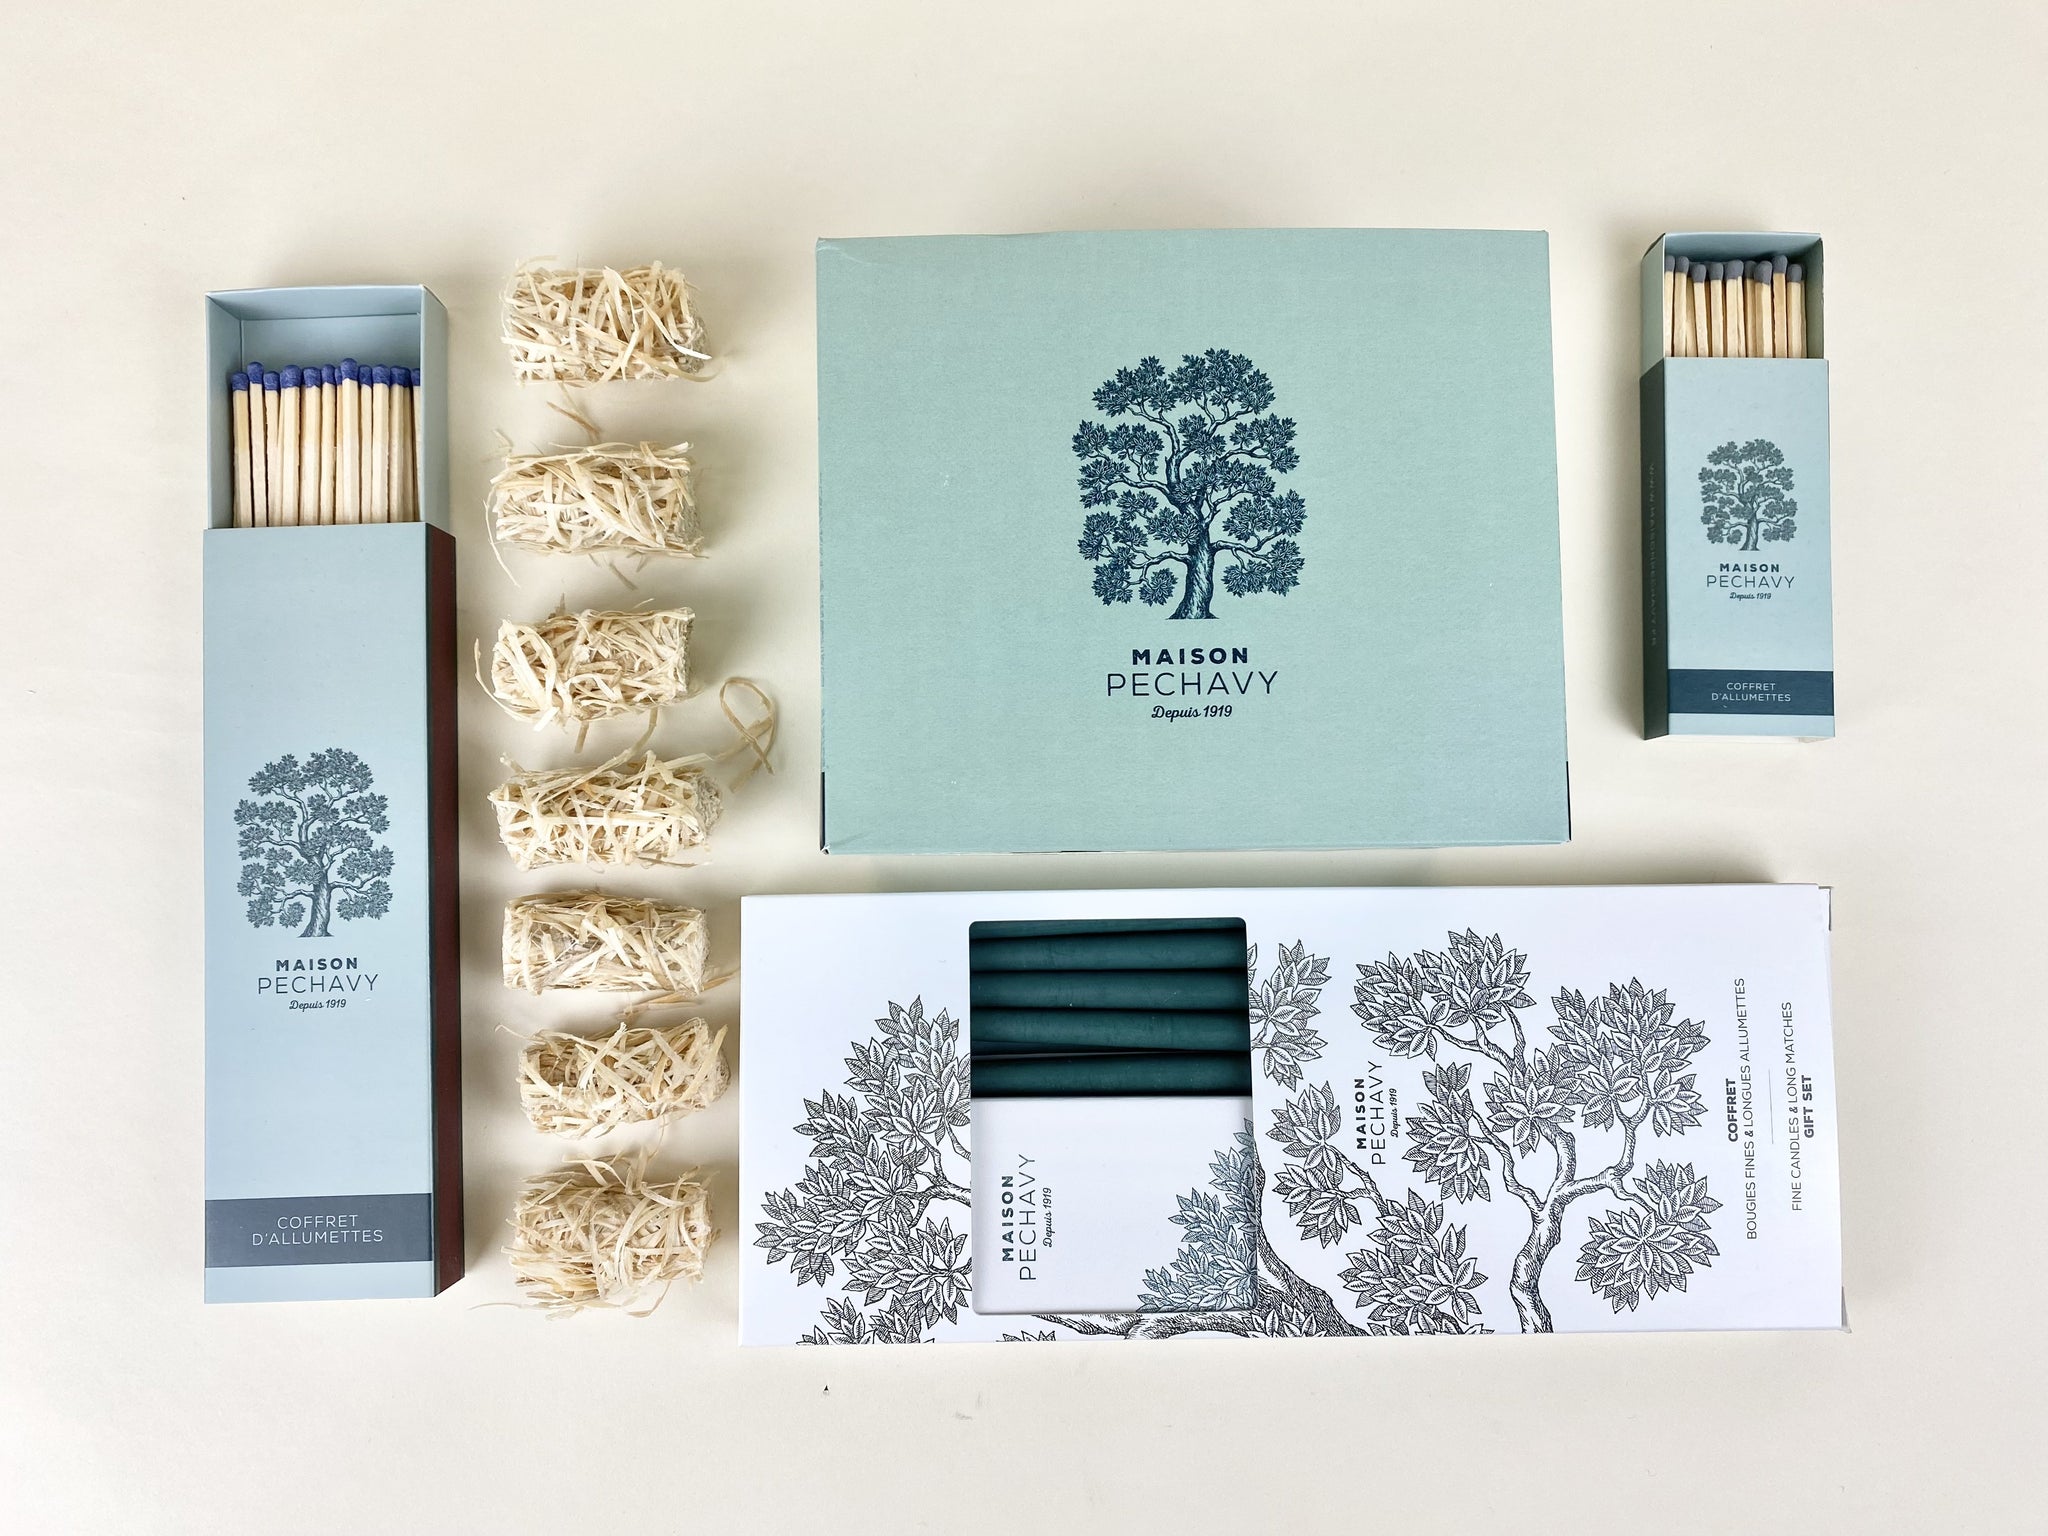 Maison Pechavy Firelighters & Matches (Celadon) - French Dry Goods